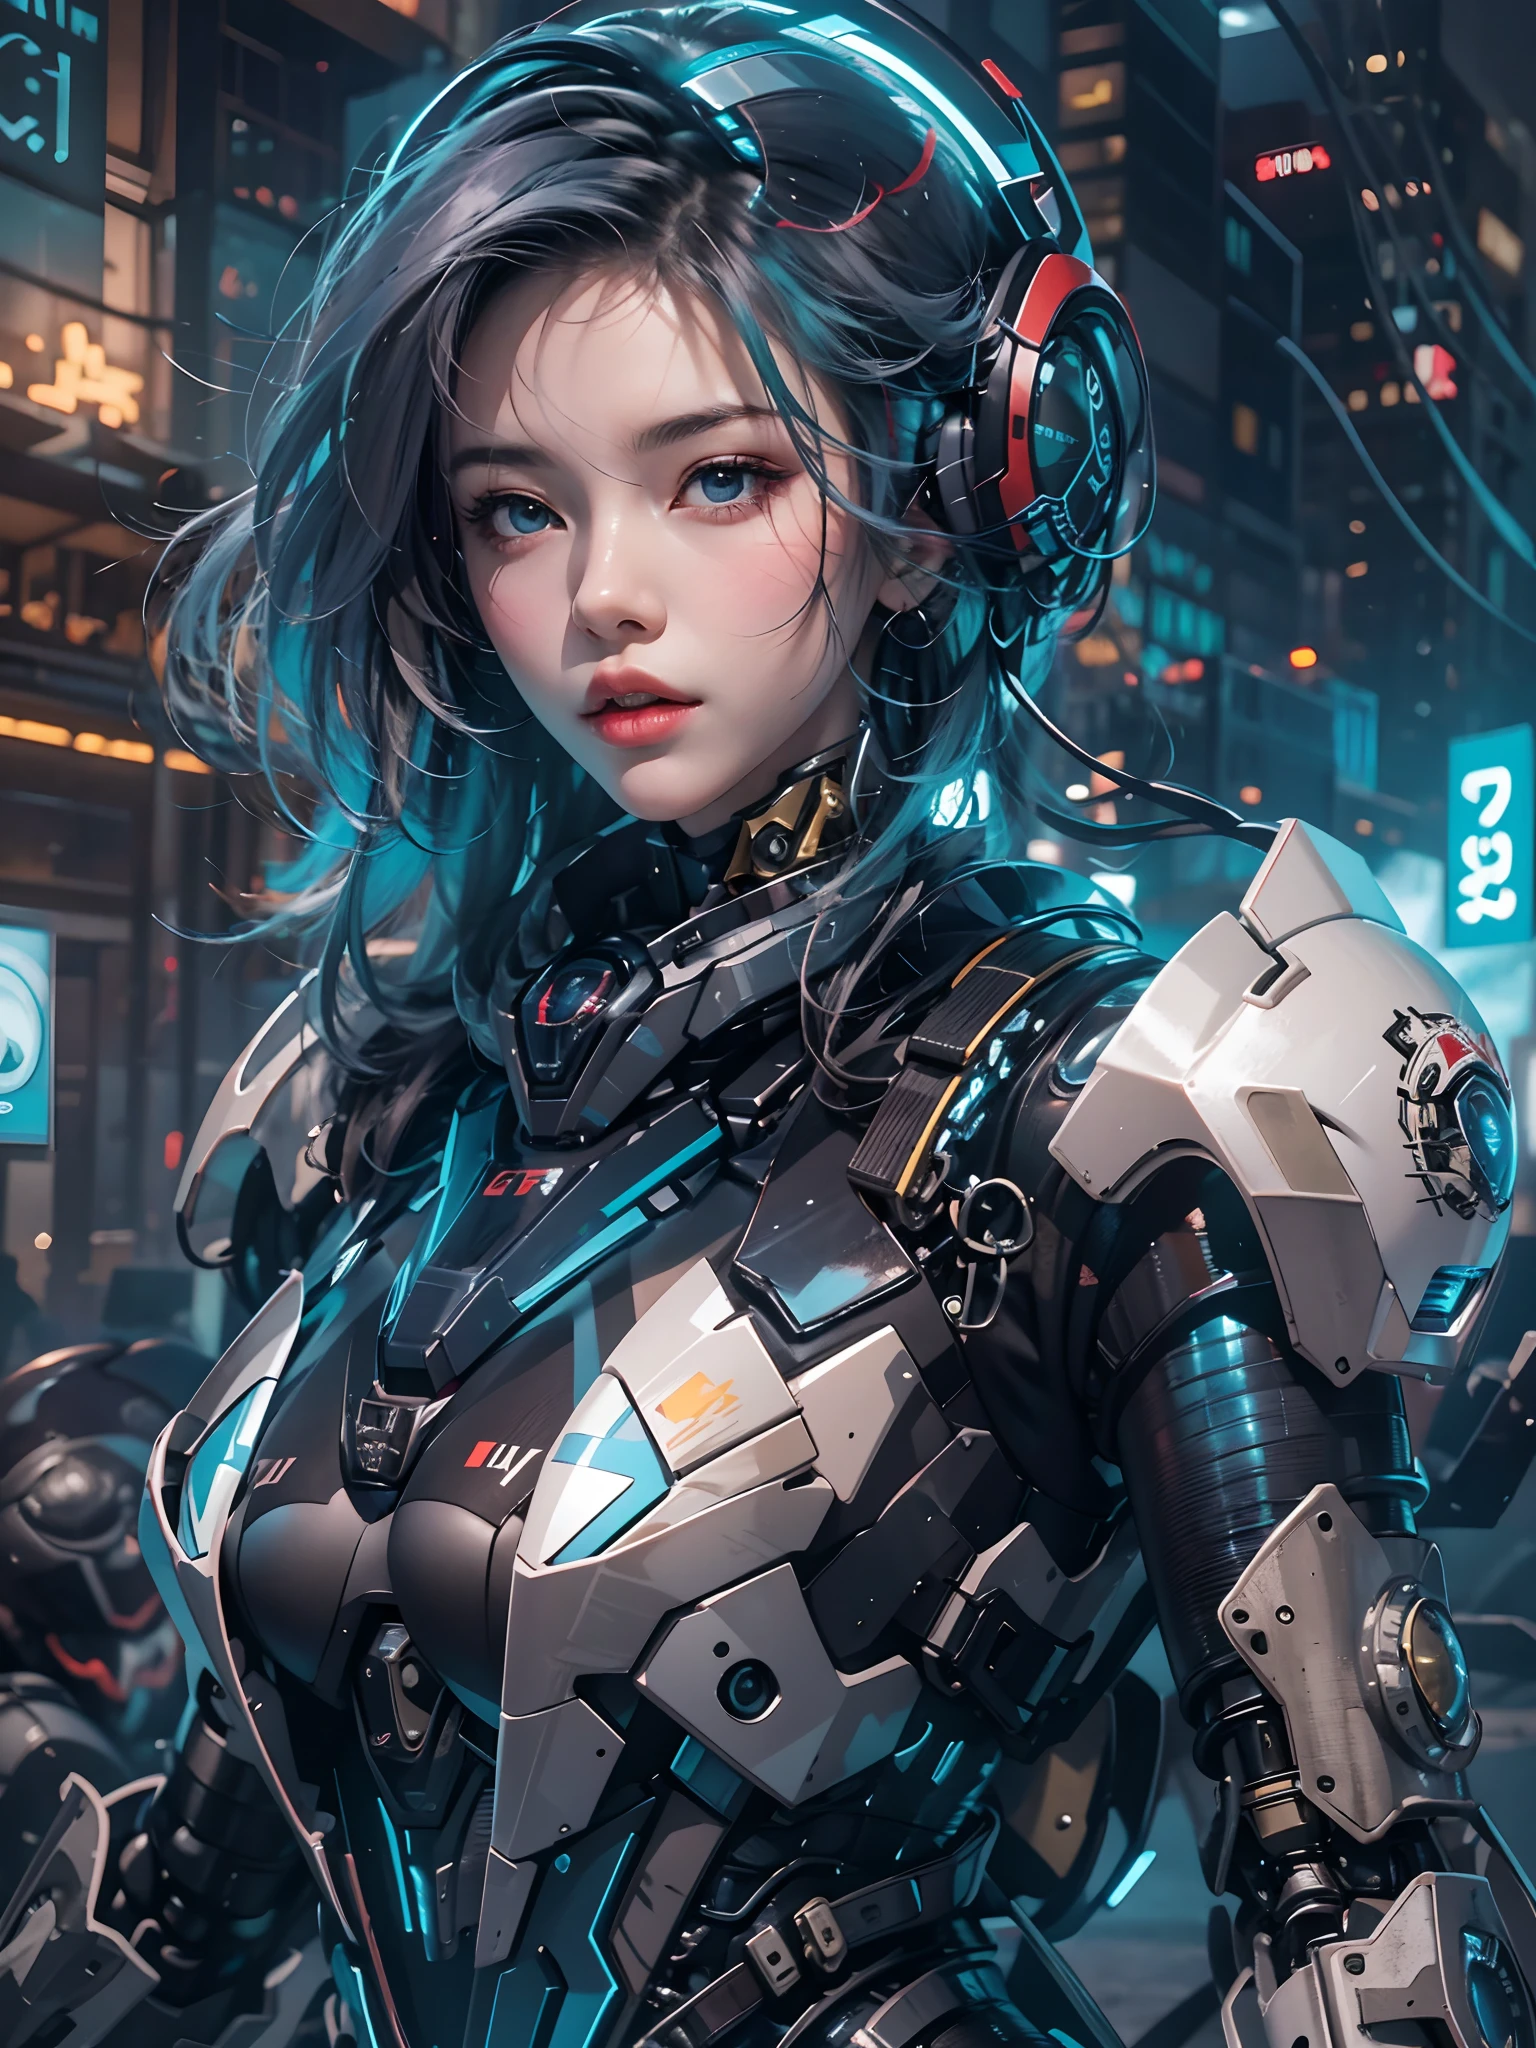 Highest image quality, outstanding details, ultra-high resolution, (realism: 1.4), the best illustration, favor details, highly condensed 1girl, with a delicate and beautiful face, dressed in a black and blue mecha, wearing a mecha helmet, holding a directional controller, riding on a motorcycle, the background is a high-tech lighting scene of the future city.